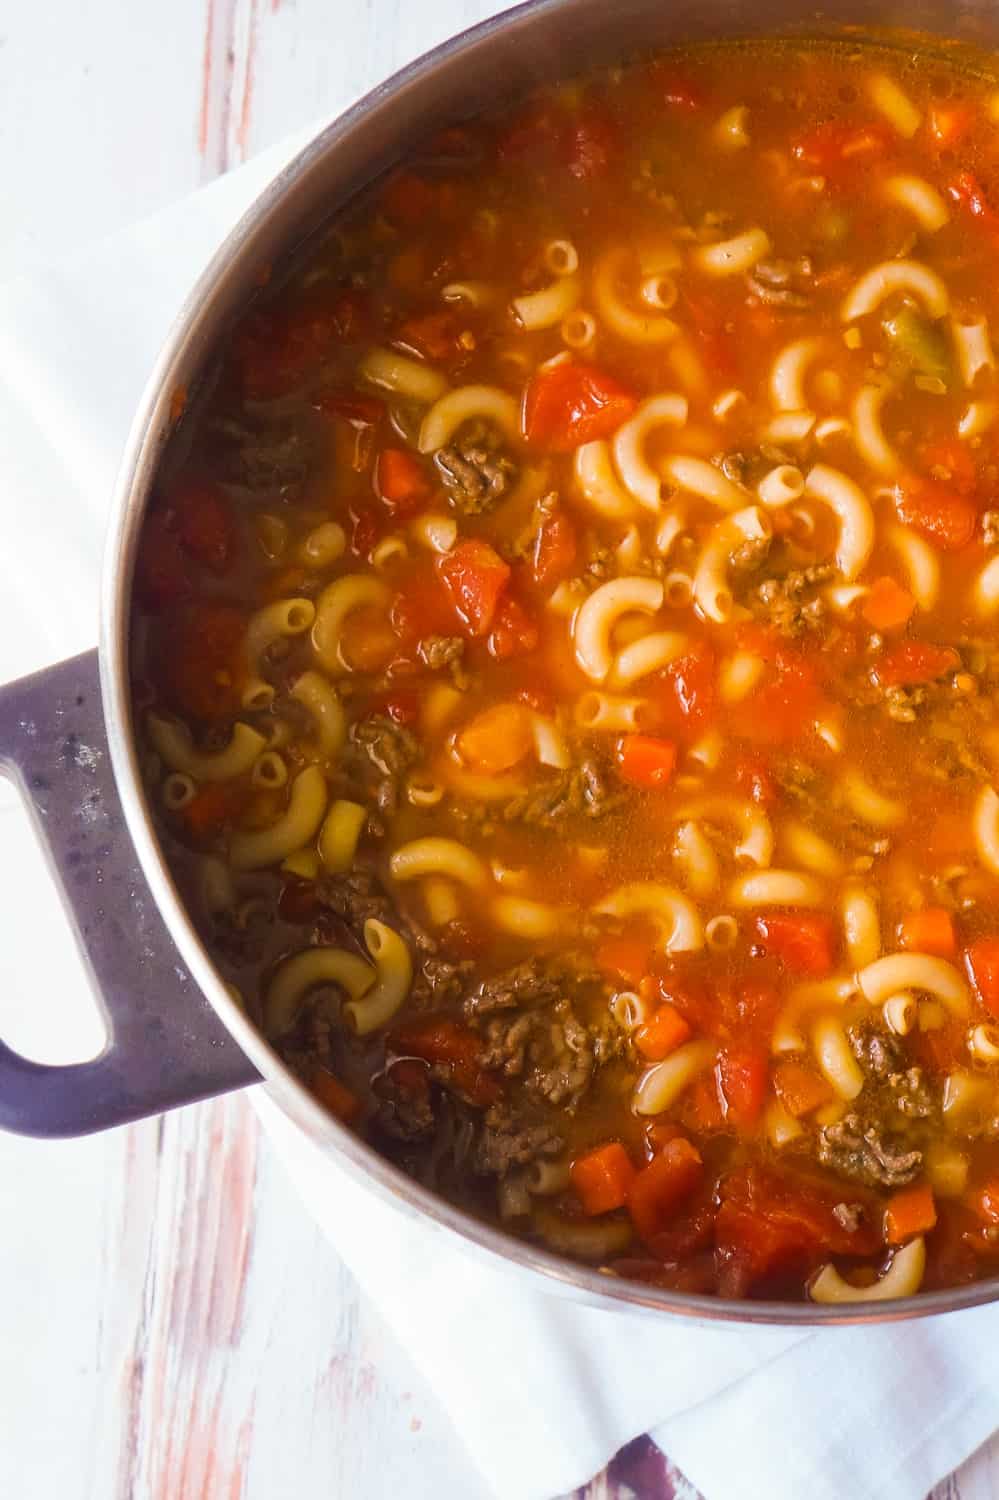 Easy Hamburger Soup with Macaroni is a hearty soup recipe that takes just fifteen minutes from start to finish.This delicious soup is loaded with ground beef, diced tomatoes, mixed vegetables and macaroni noodles.